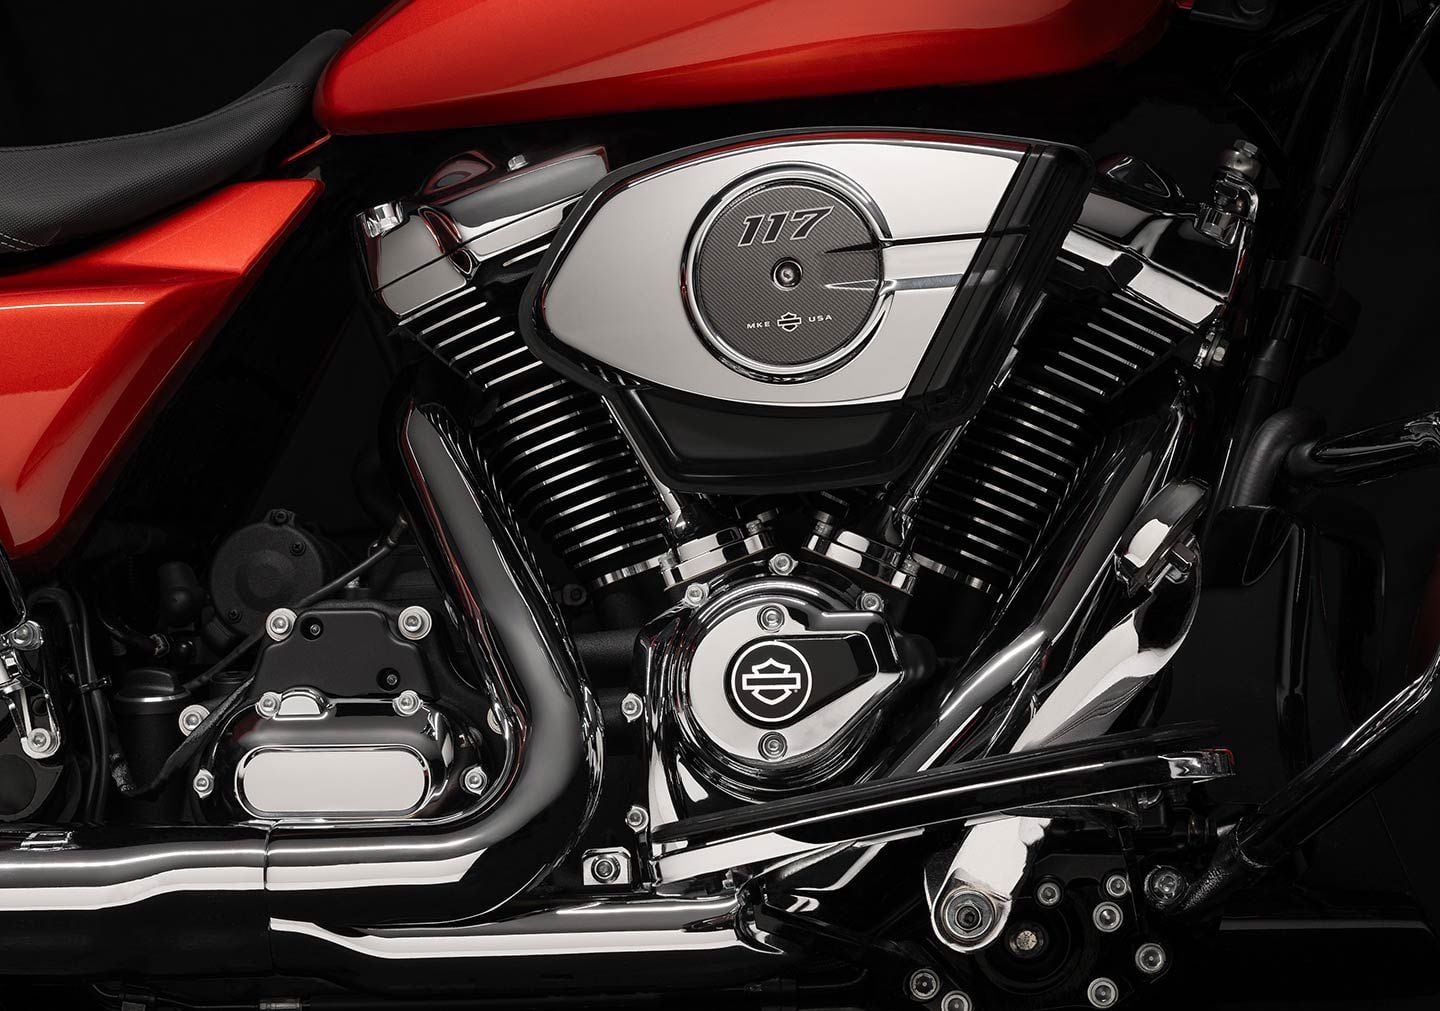 Both the 2024 Street Glide and 2024 Road Glide feature the M-8 117 engine, which puts out a claimed 105 hp at 4,600 rpm and 130 lb.-ft. of torque at 3,250 rpm.